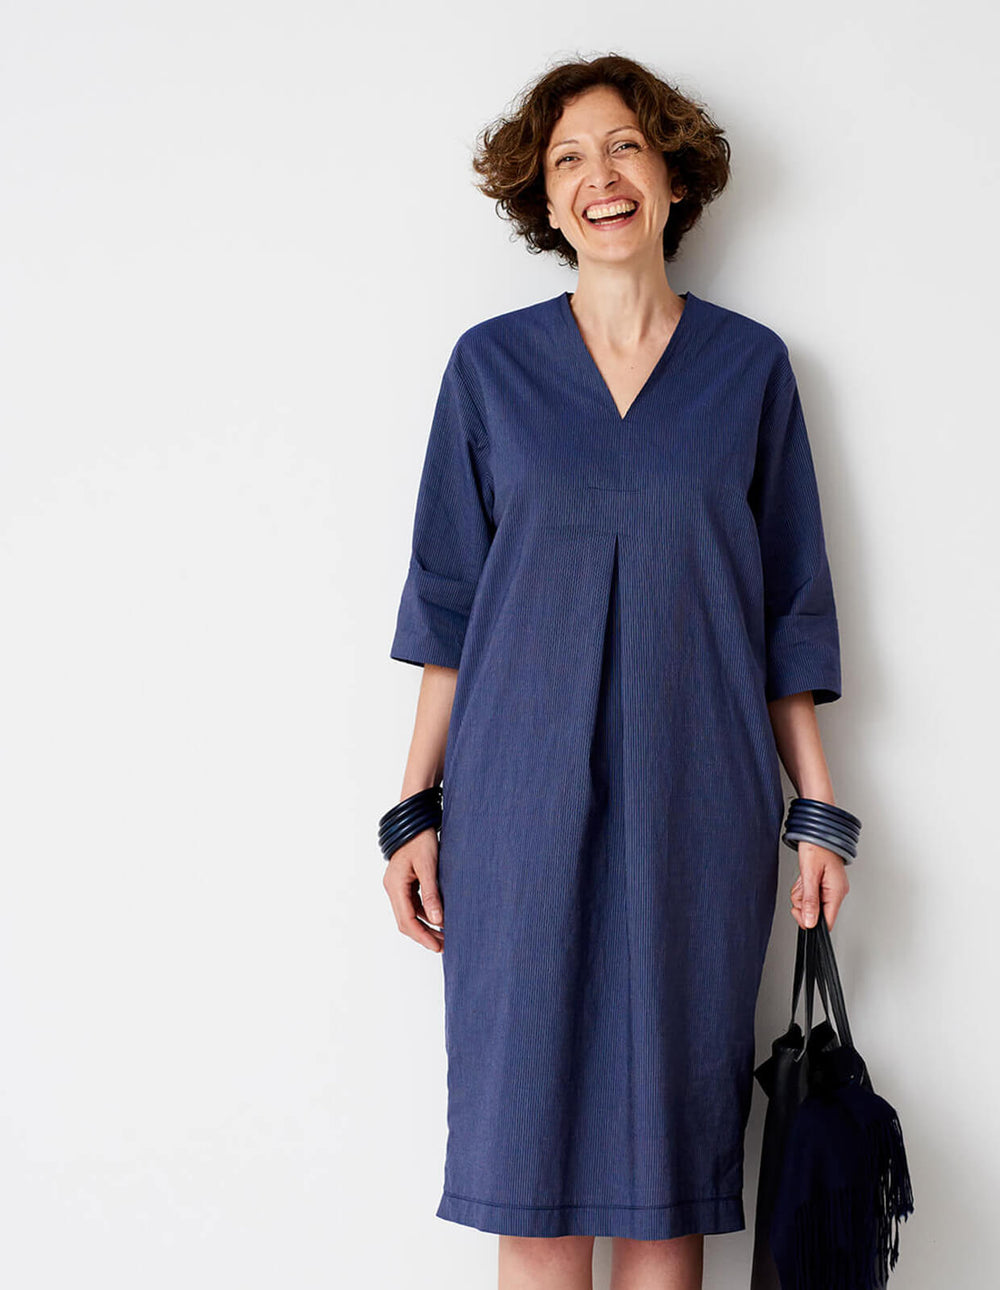 Woman wearing the V-neck Shift Dress sewing pattern from The Maker's Atelier on The Fold Line. A dress pattern made in cotton shirting, chambrays, lightweight linen, broderie anglaise, lightweight wool/viscose mixes, and babycord fabrics, featuring an inv